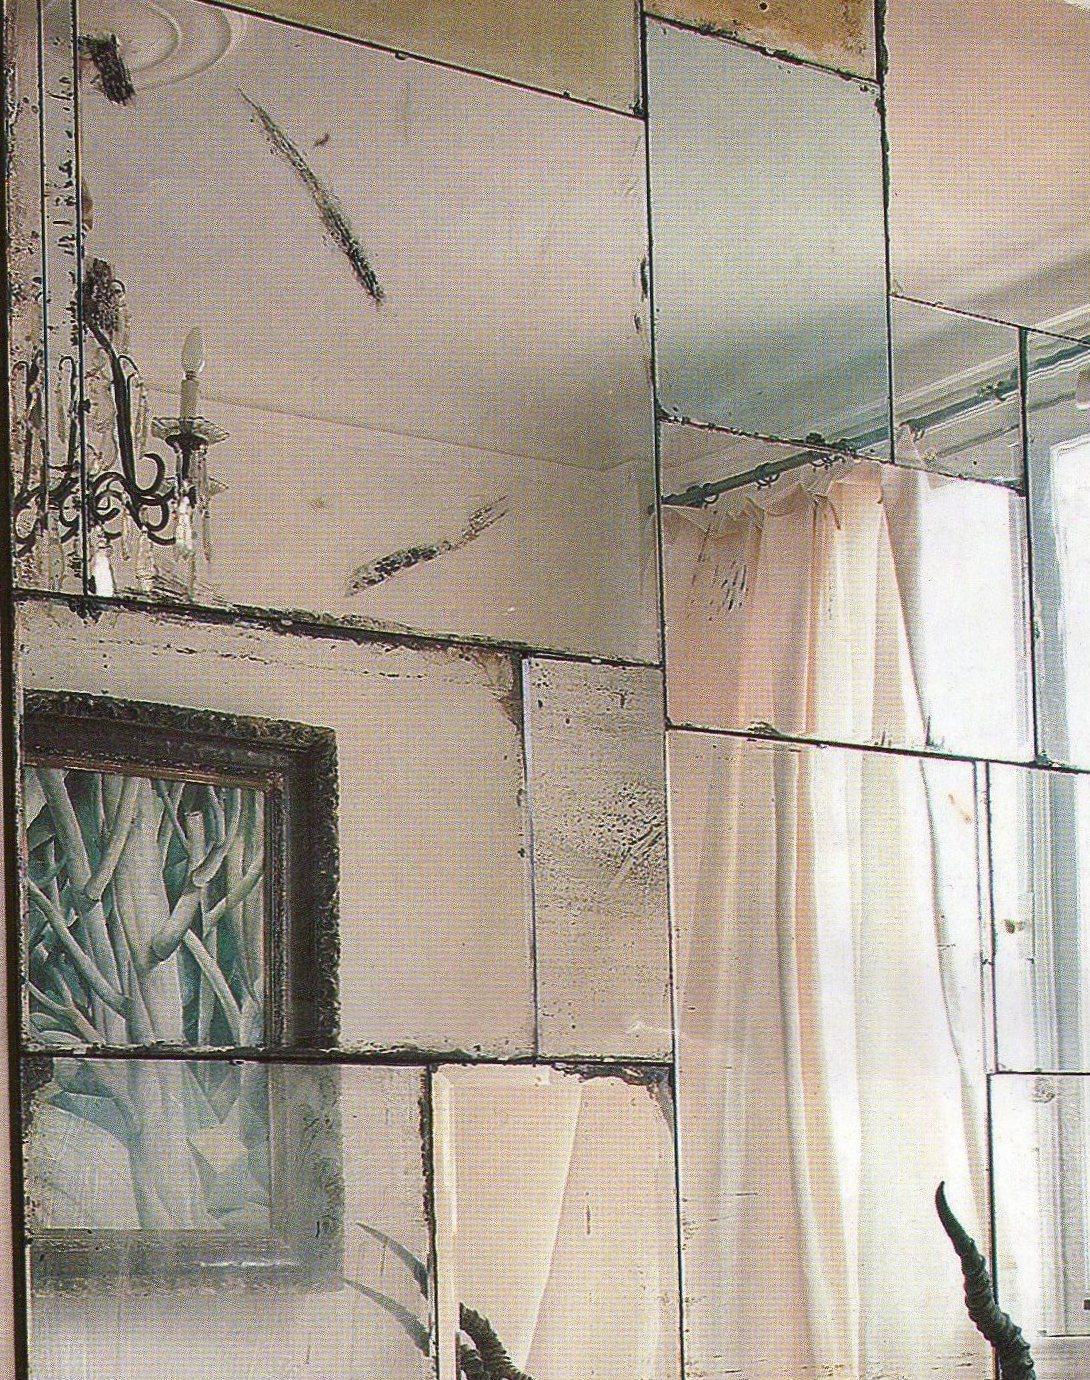 Spanish Industrial Custom-Made Artisanal Mirrors Hand-Aged Authentic Finish Frameless XL For Sale